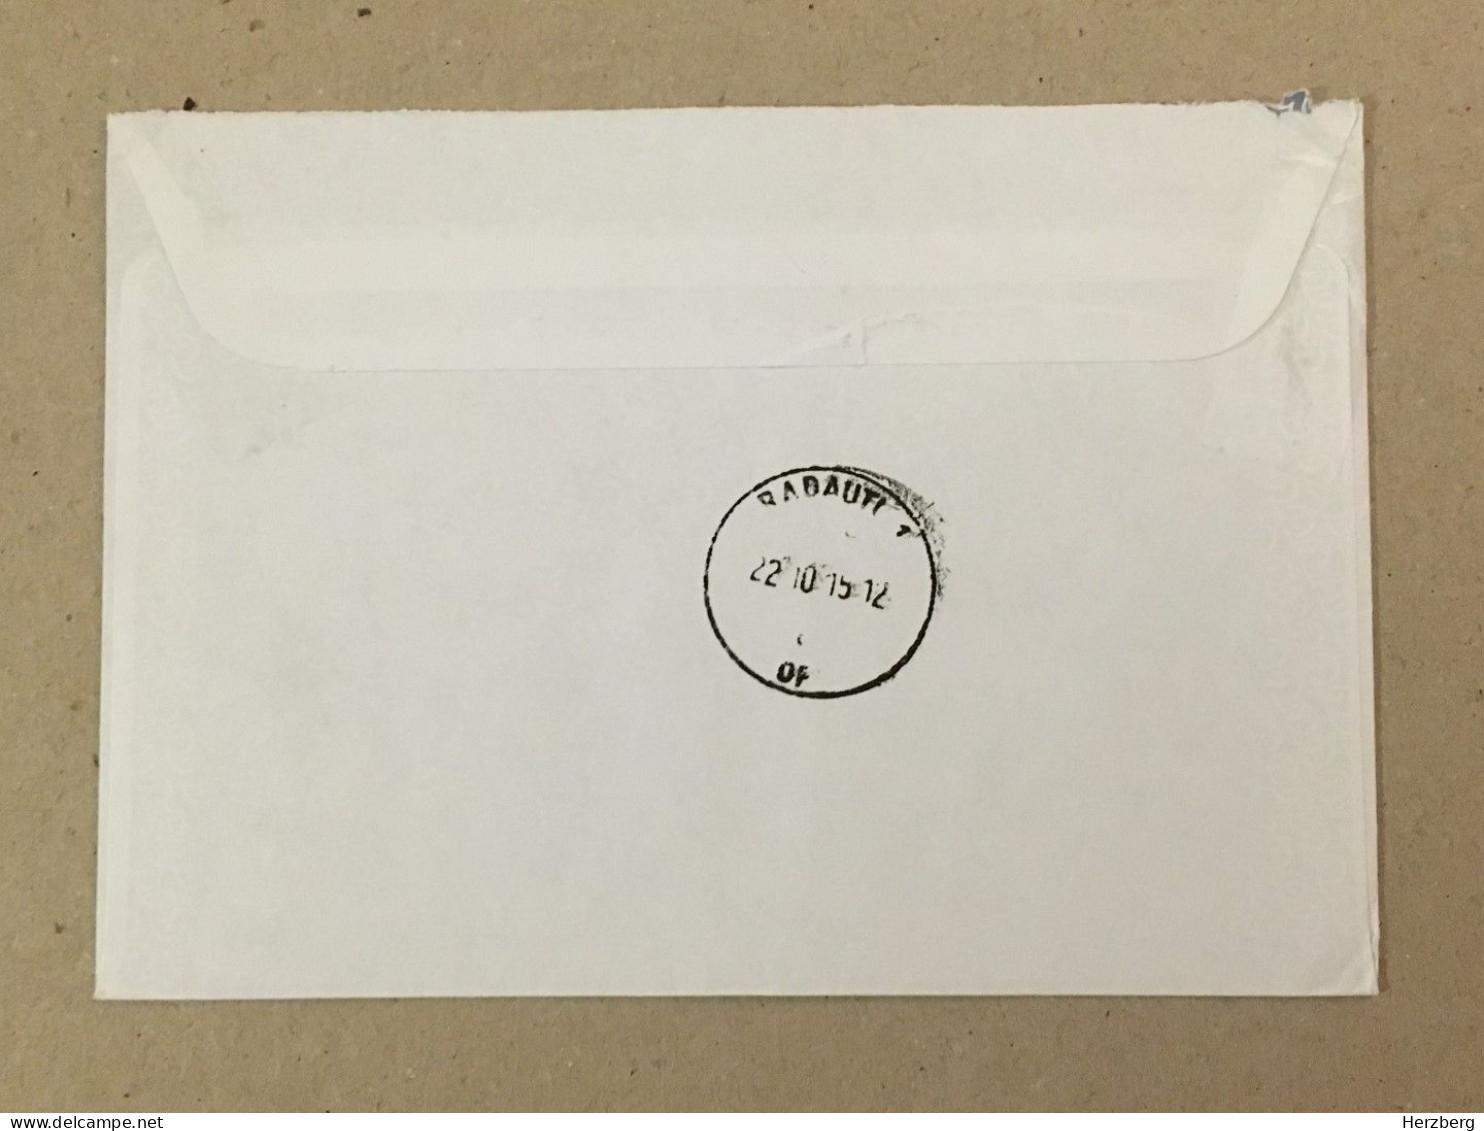 Hungary Magyarorszag Used Letter Stamp Circulated Cover Postal Label Printed Sticker Stamp 2015 - Covers & Documents